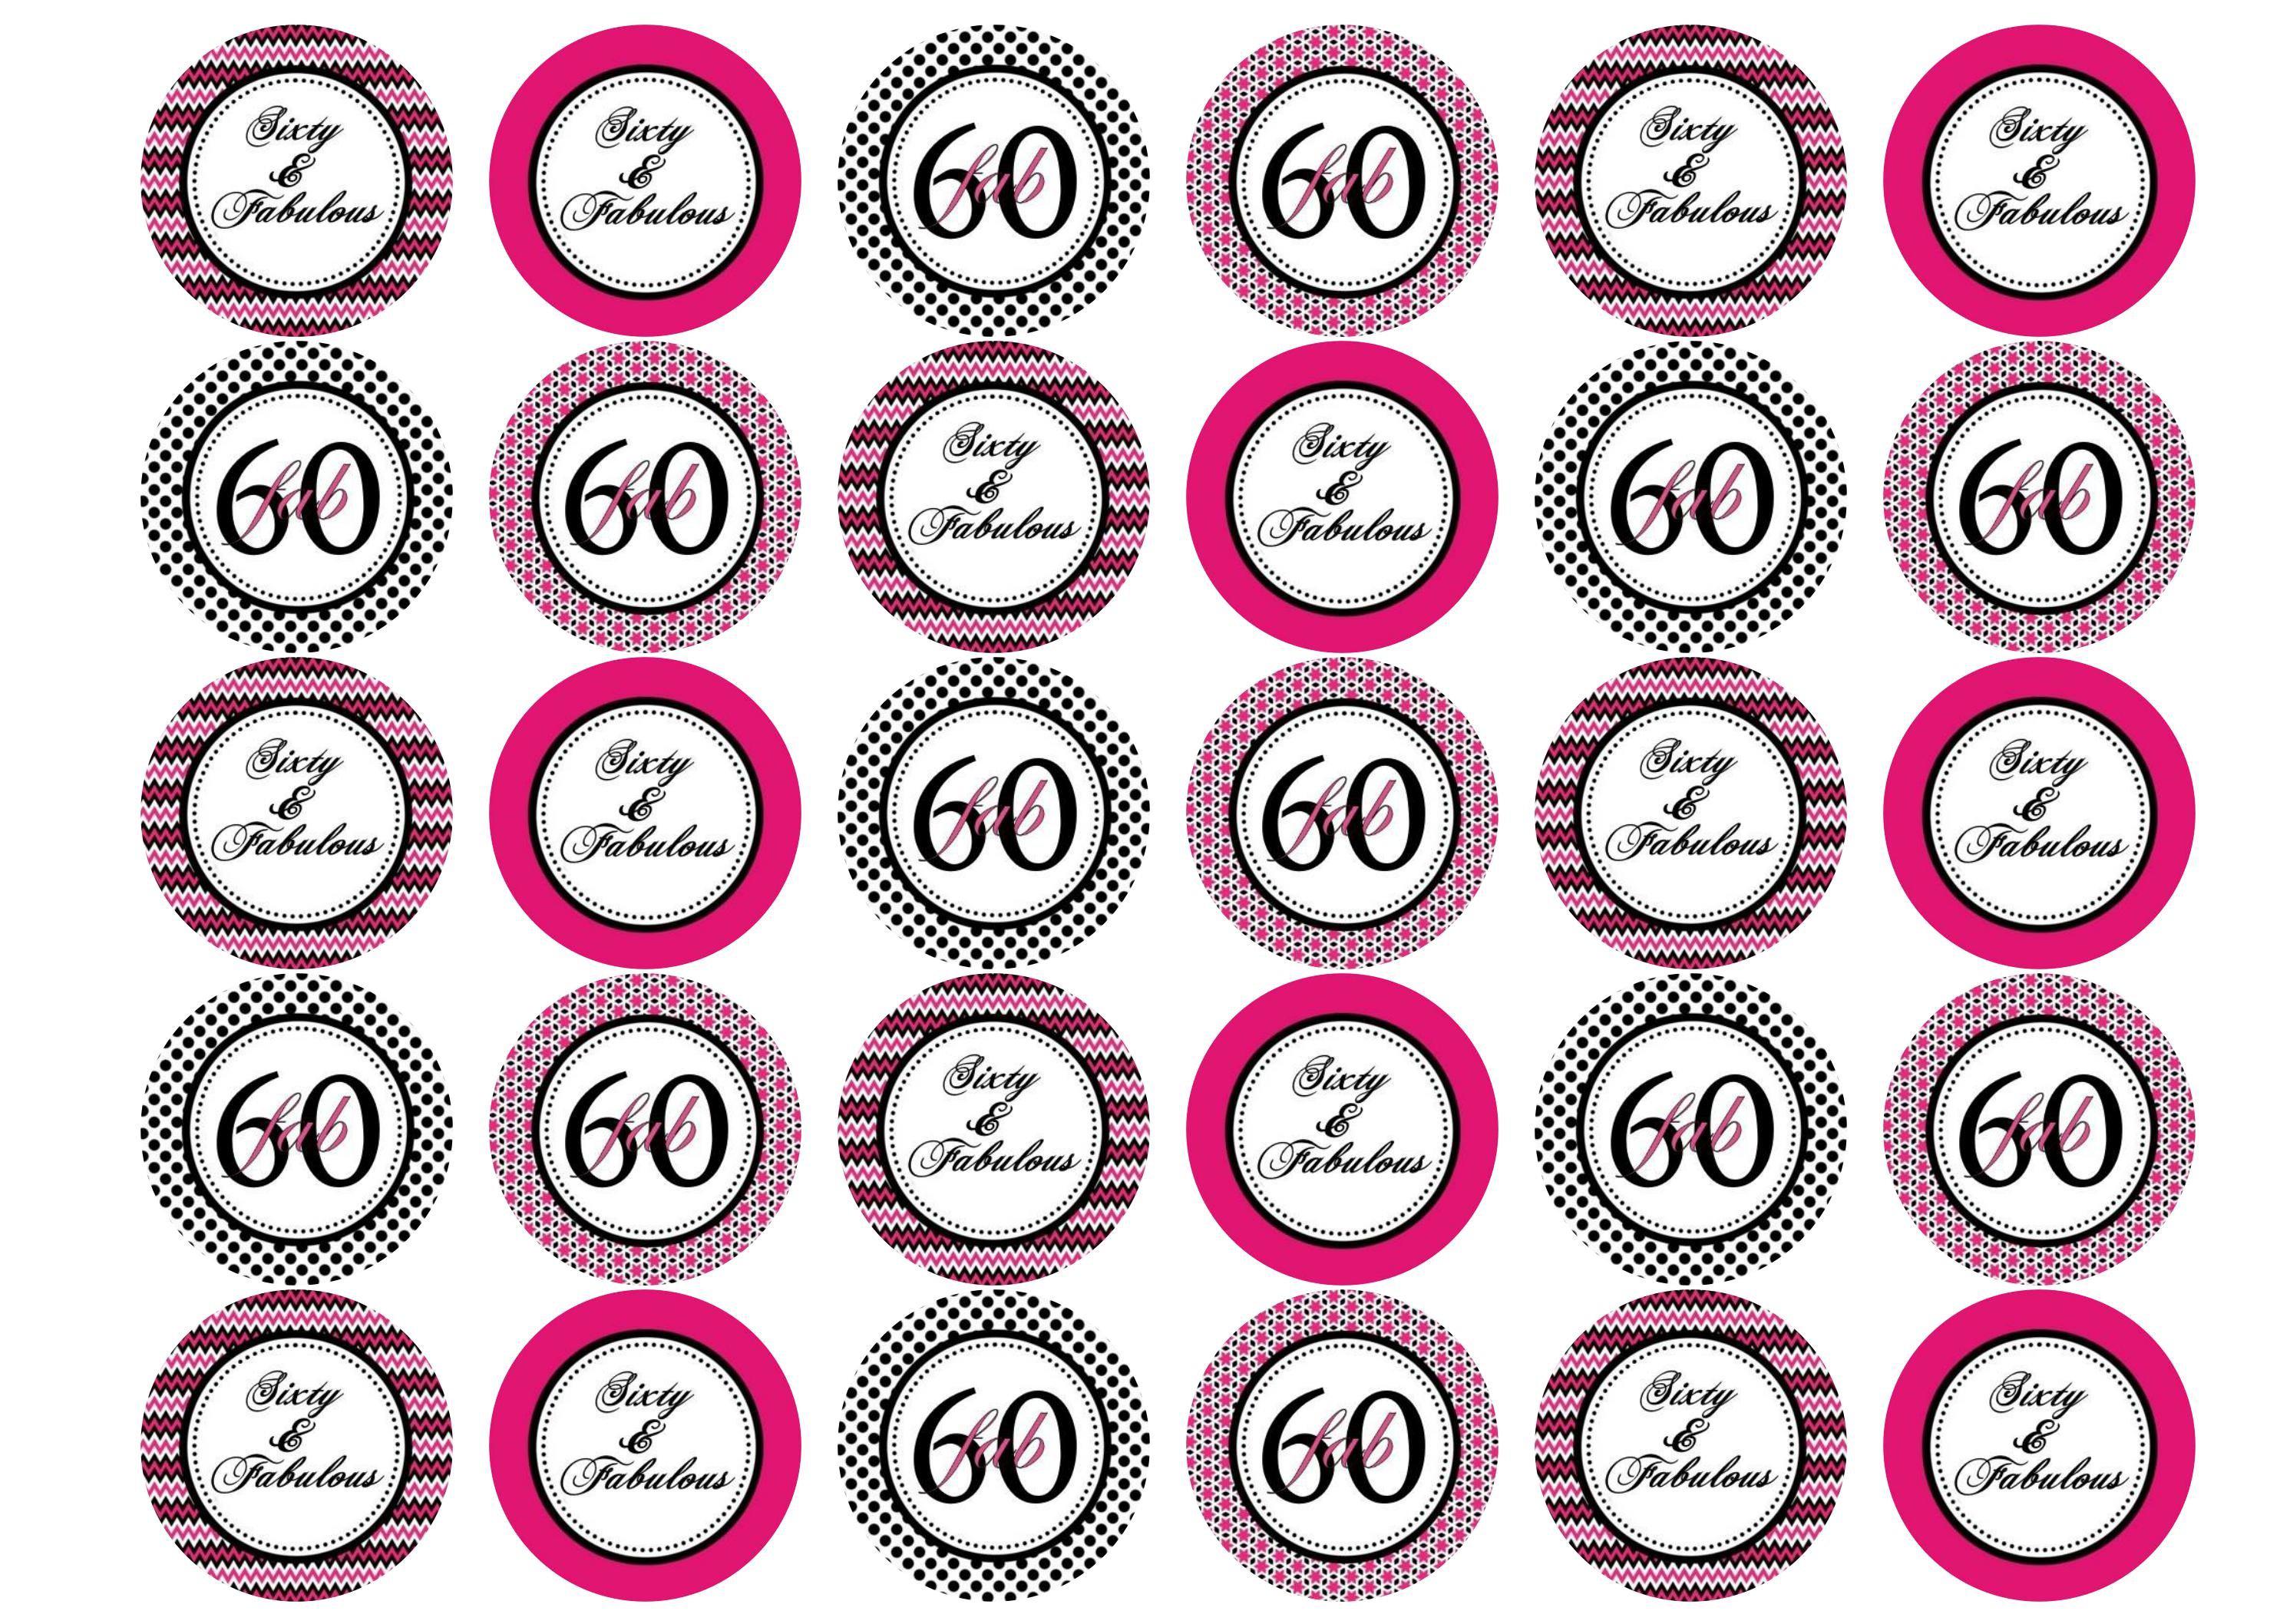 30 pink and black cupcake toppers for a 60th birthday